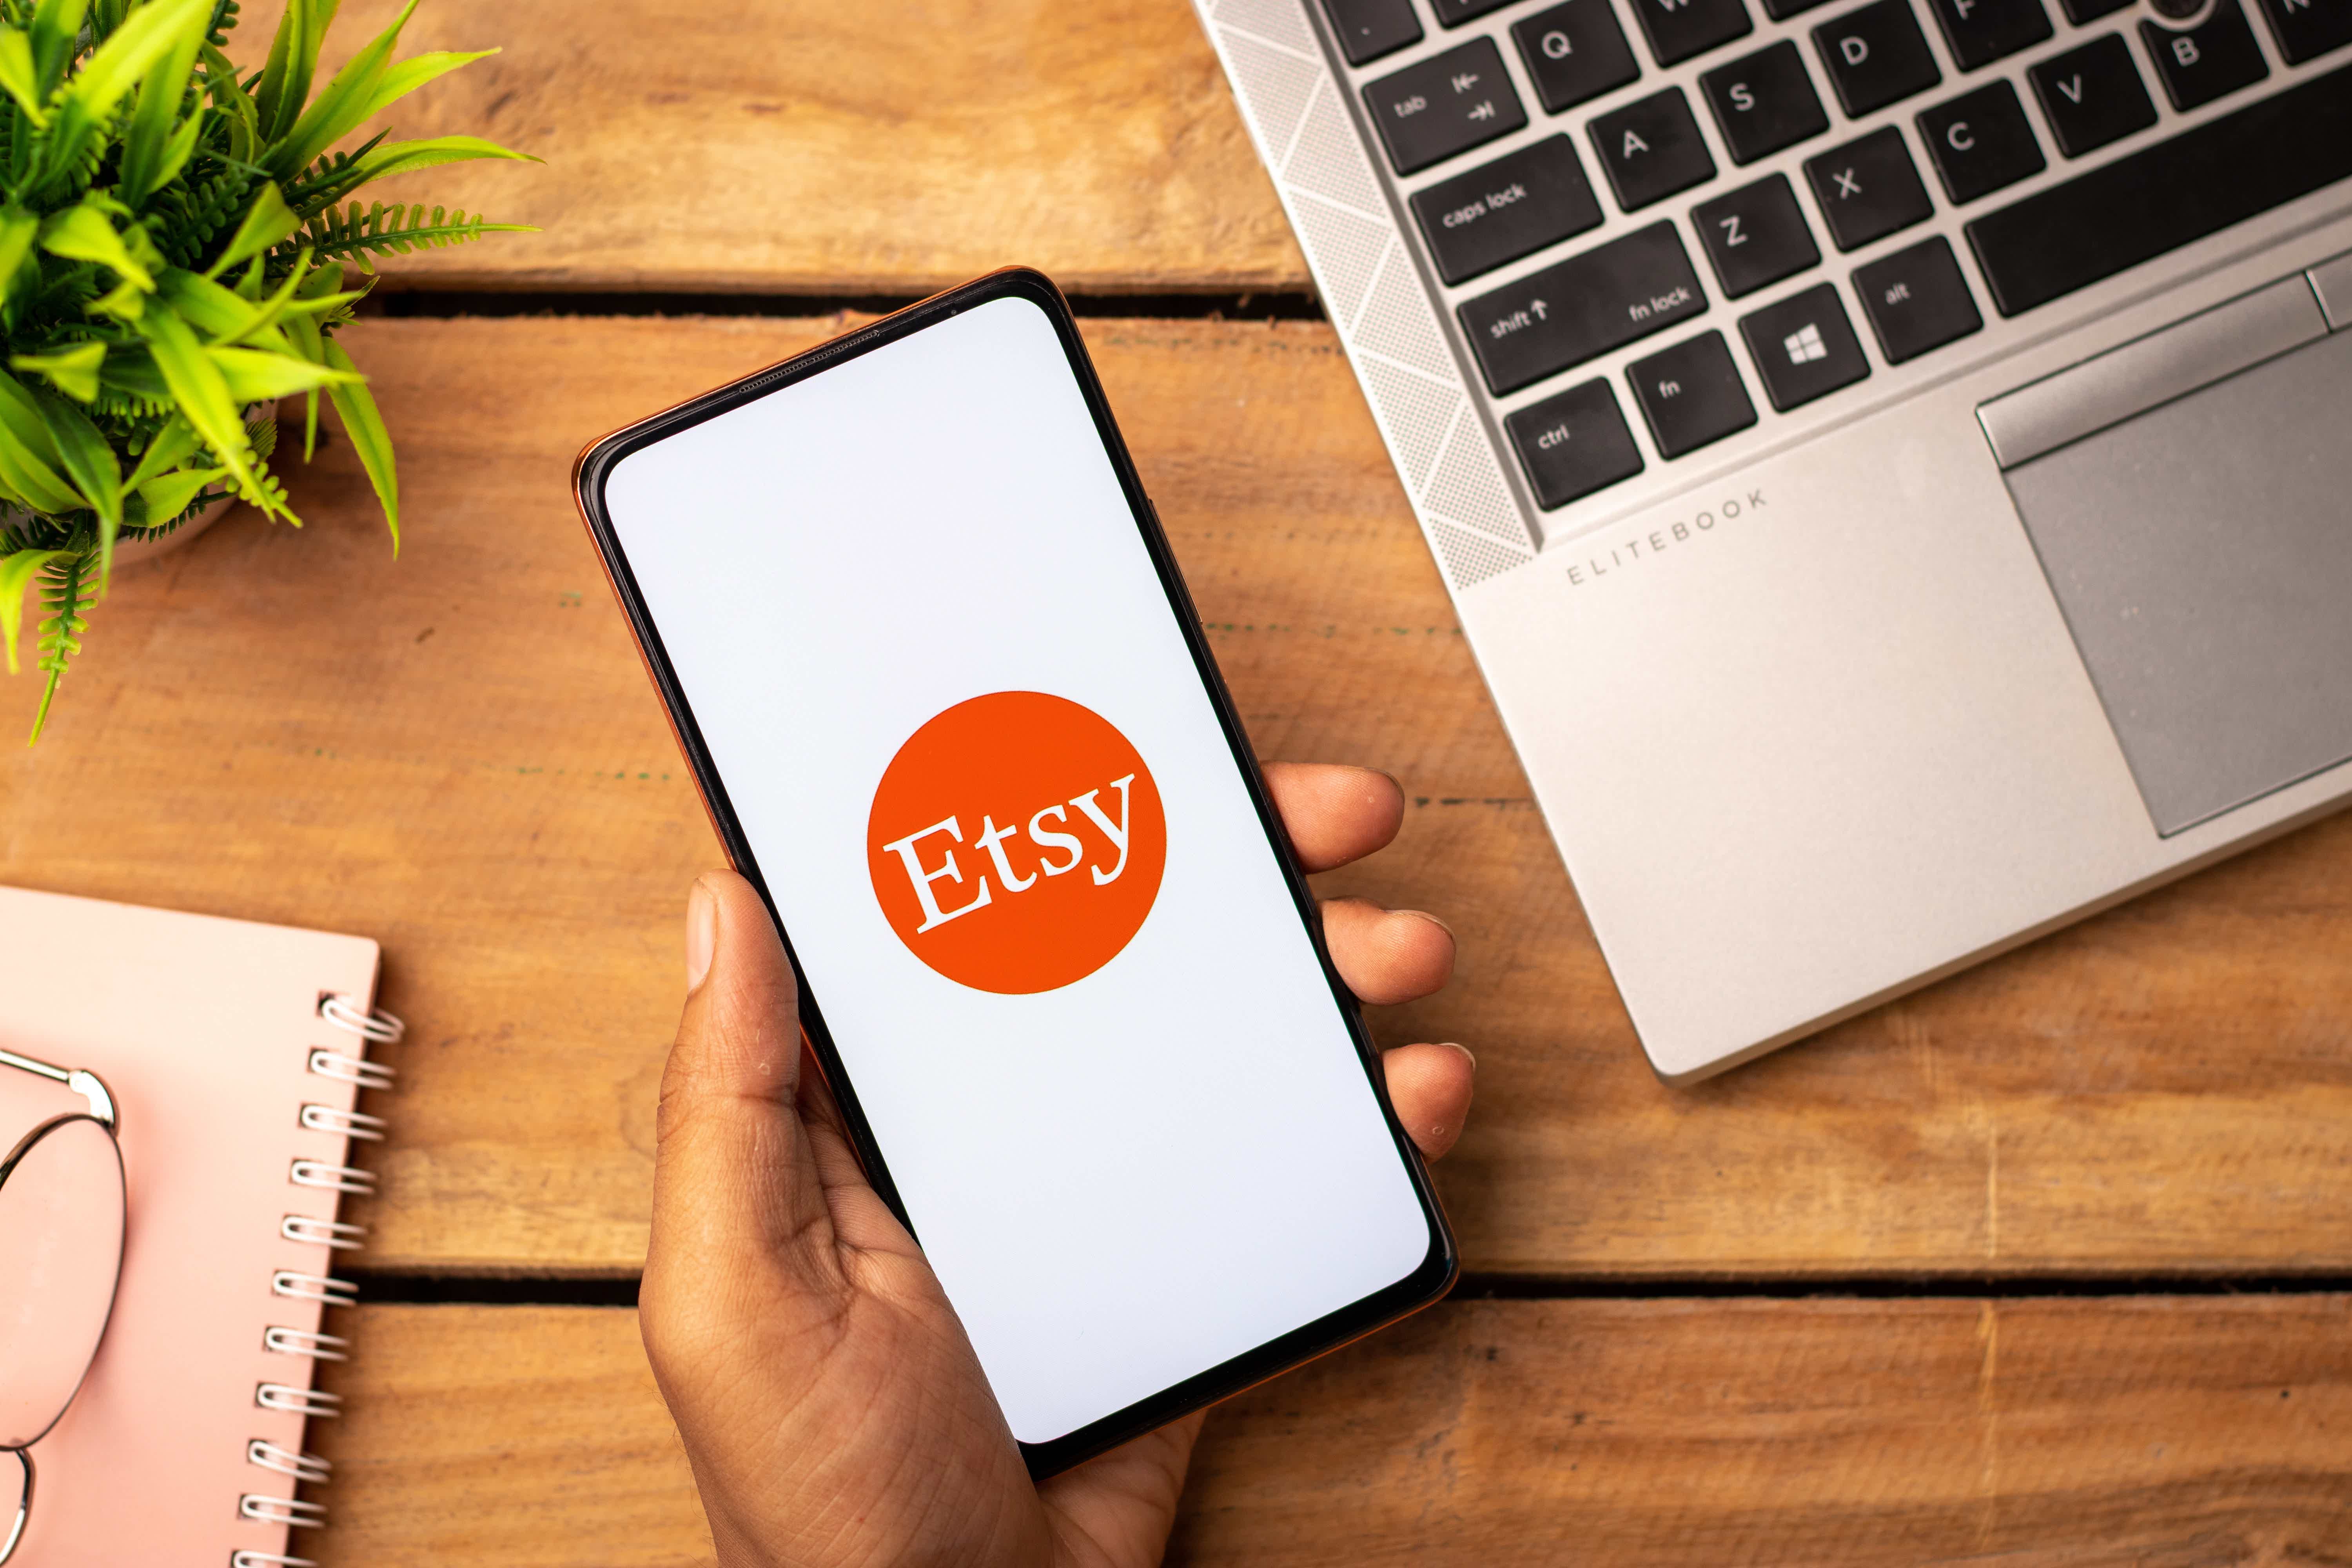 Find out how to buy Etsy stock online. Source: Adobe Stock.